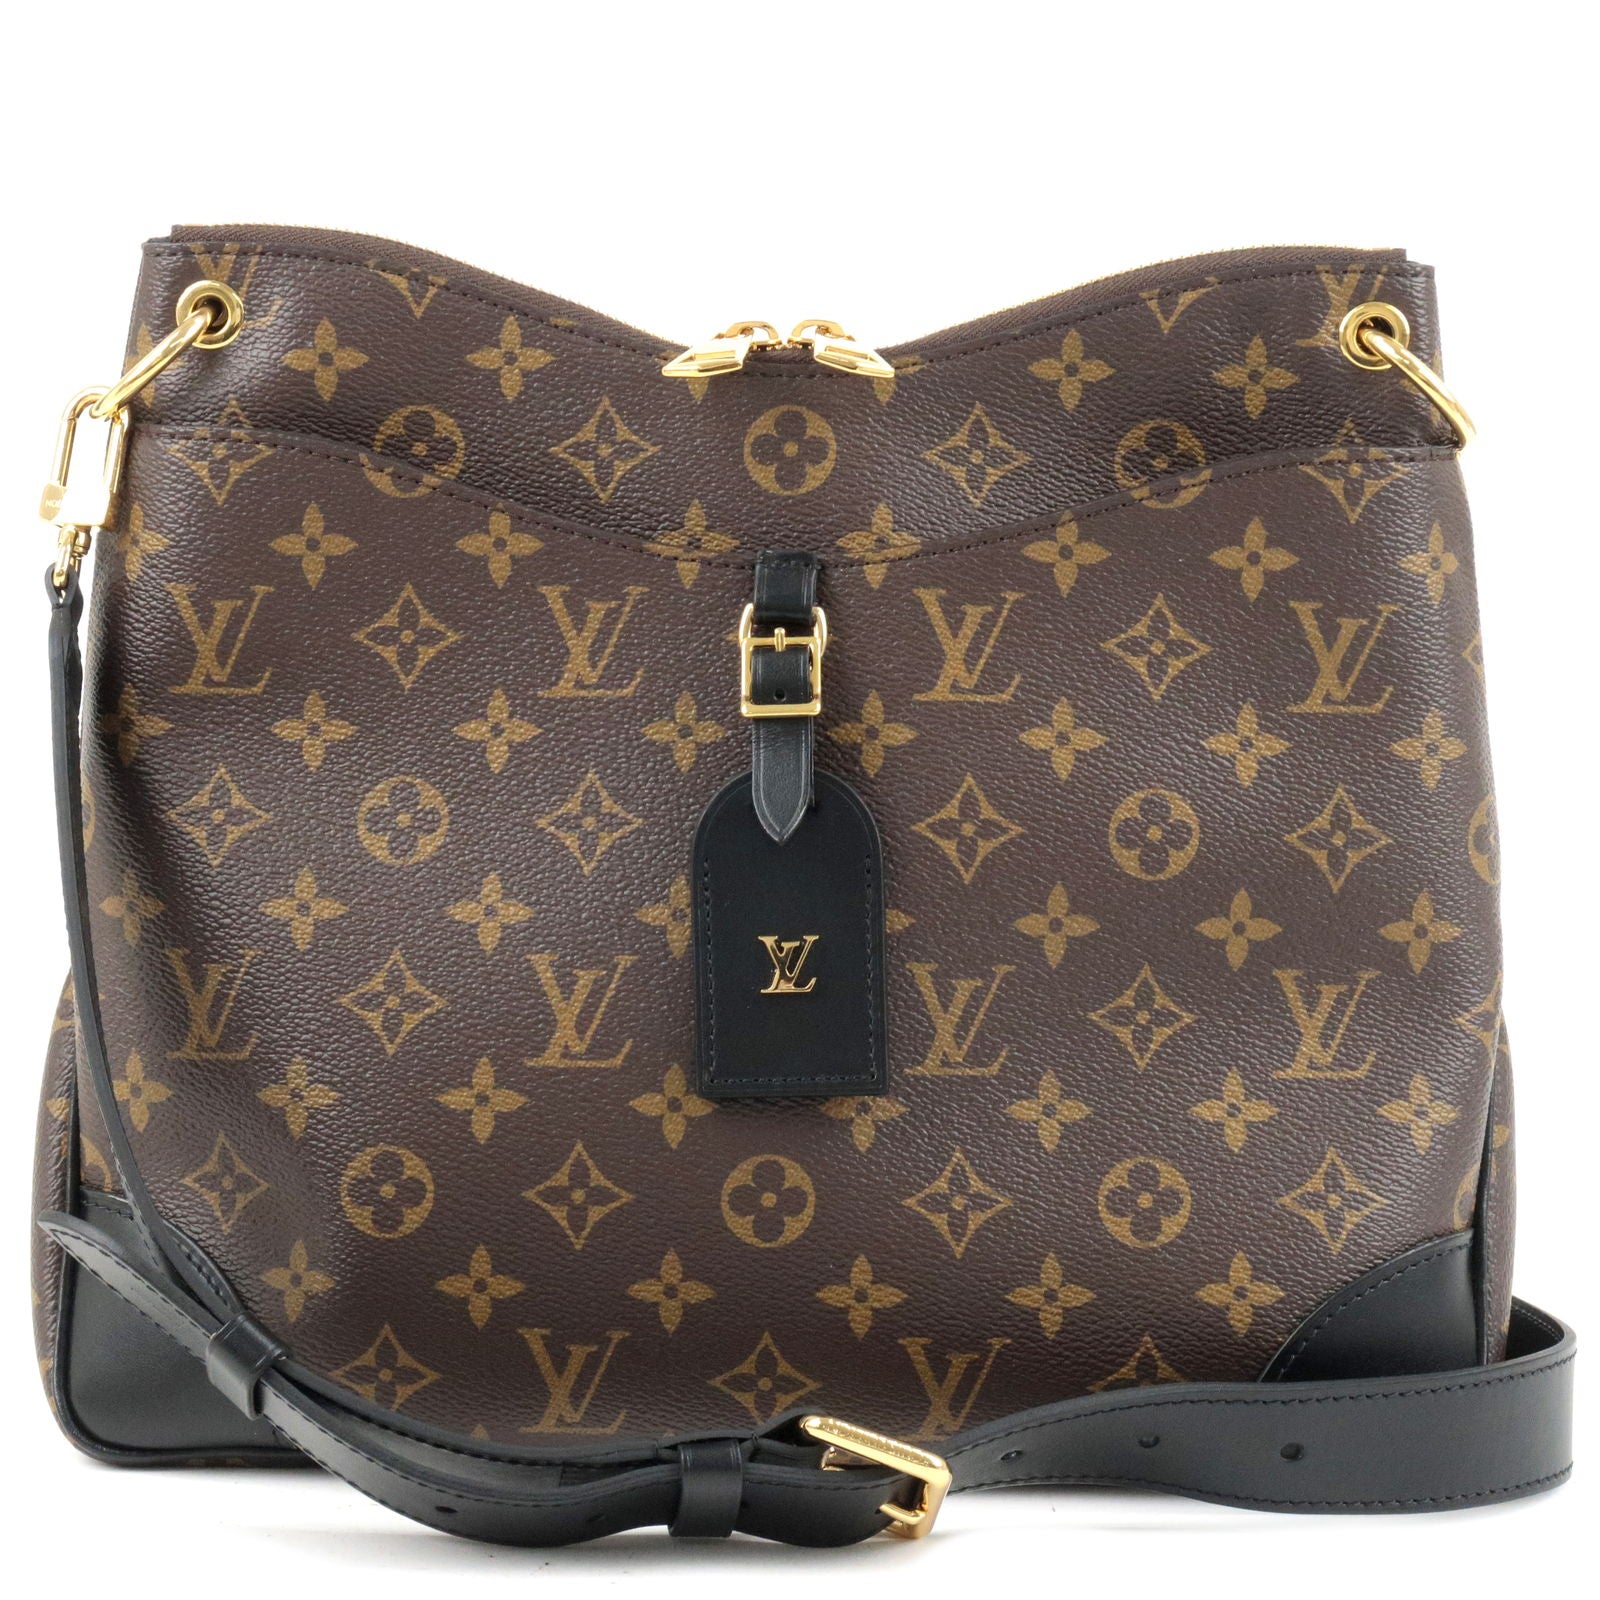 Louis Vuitton Price increase in 2016